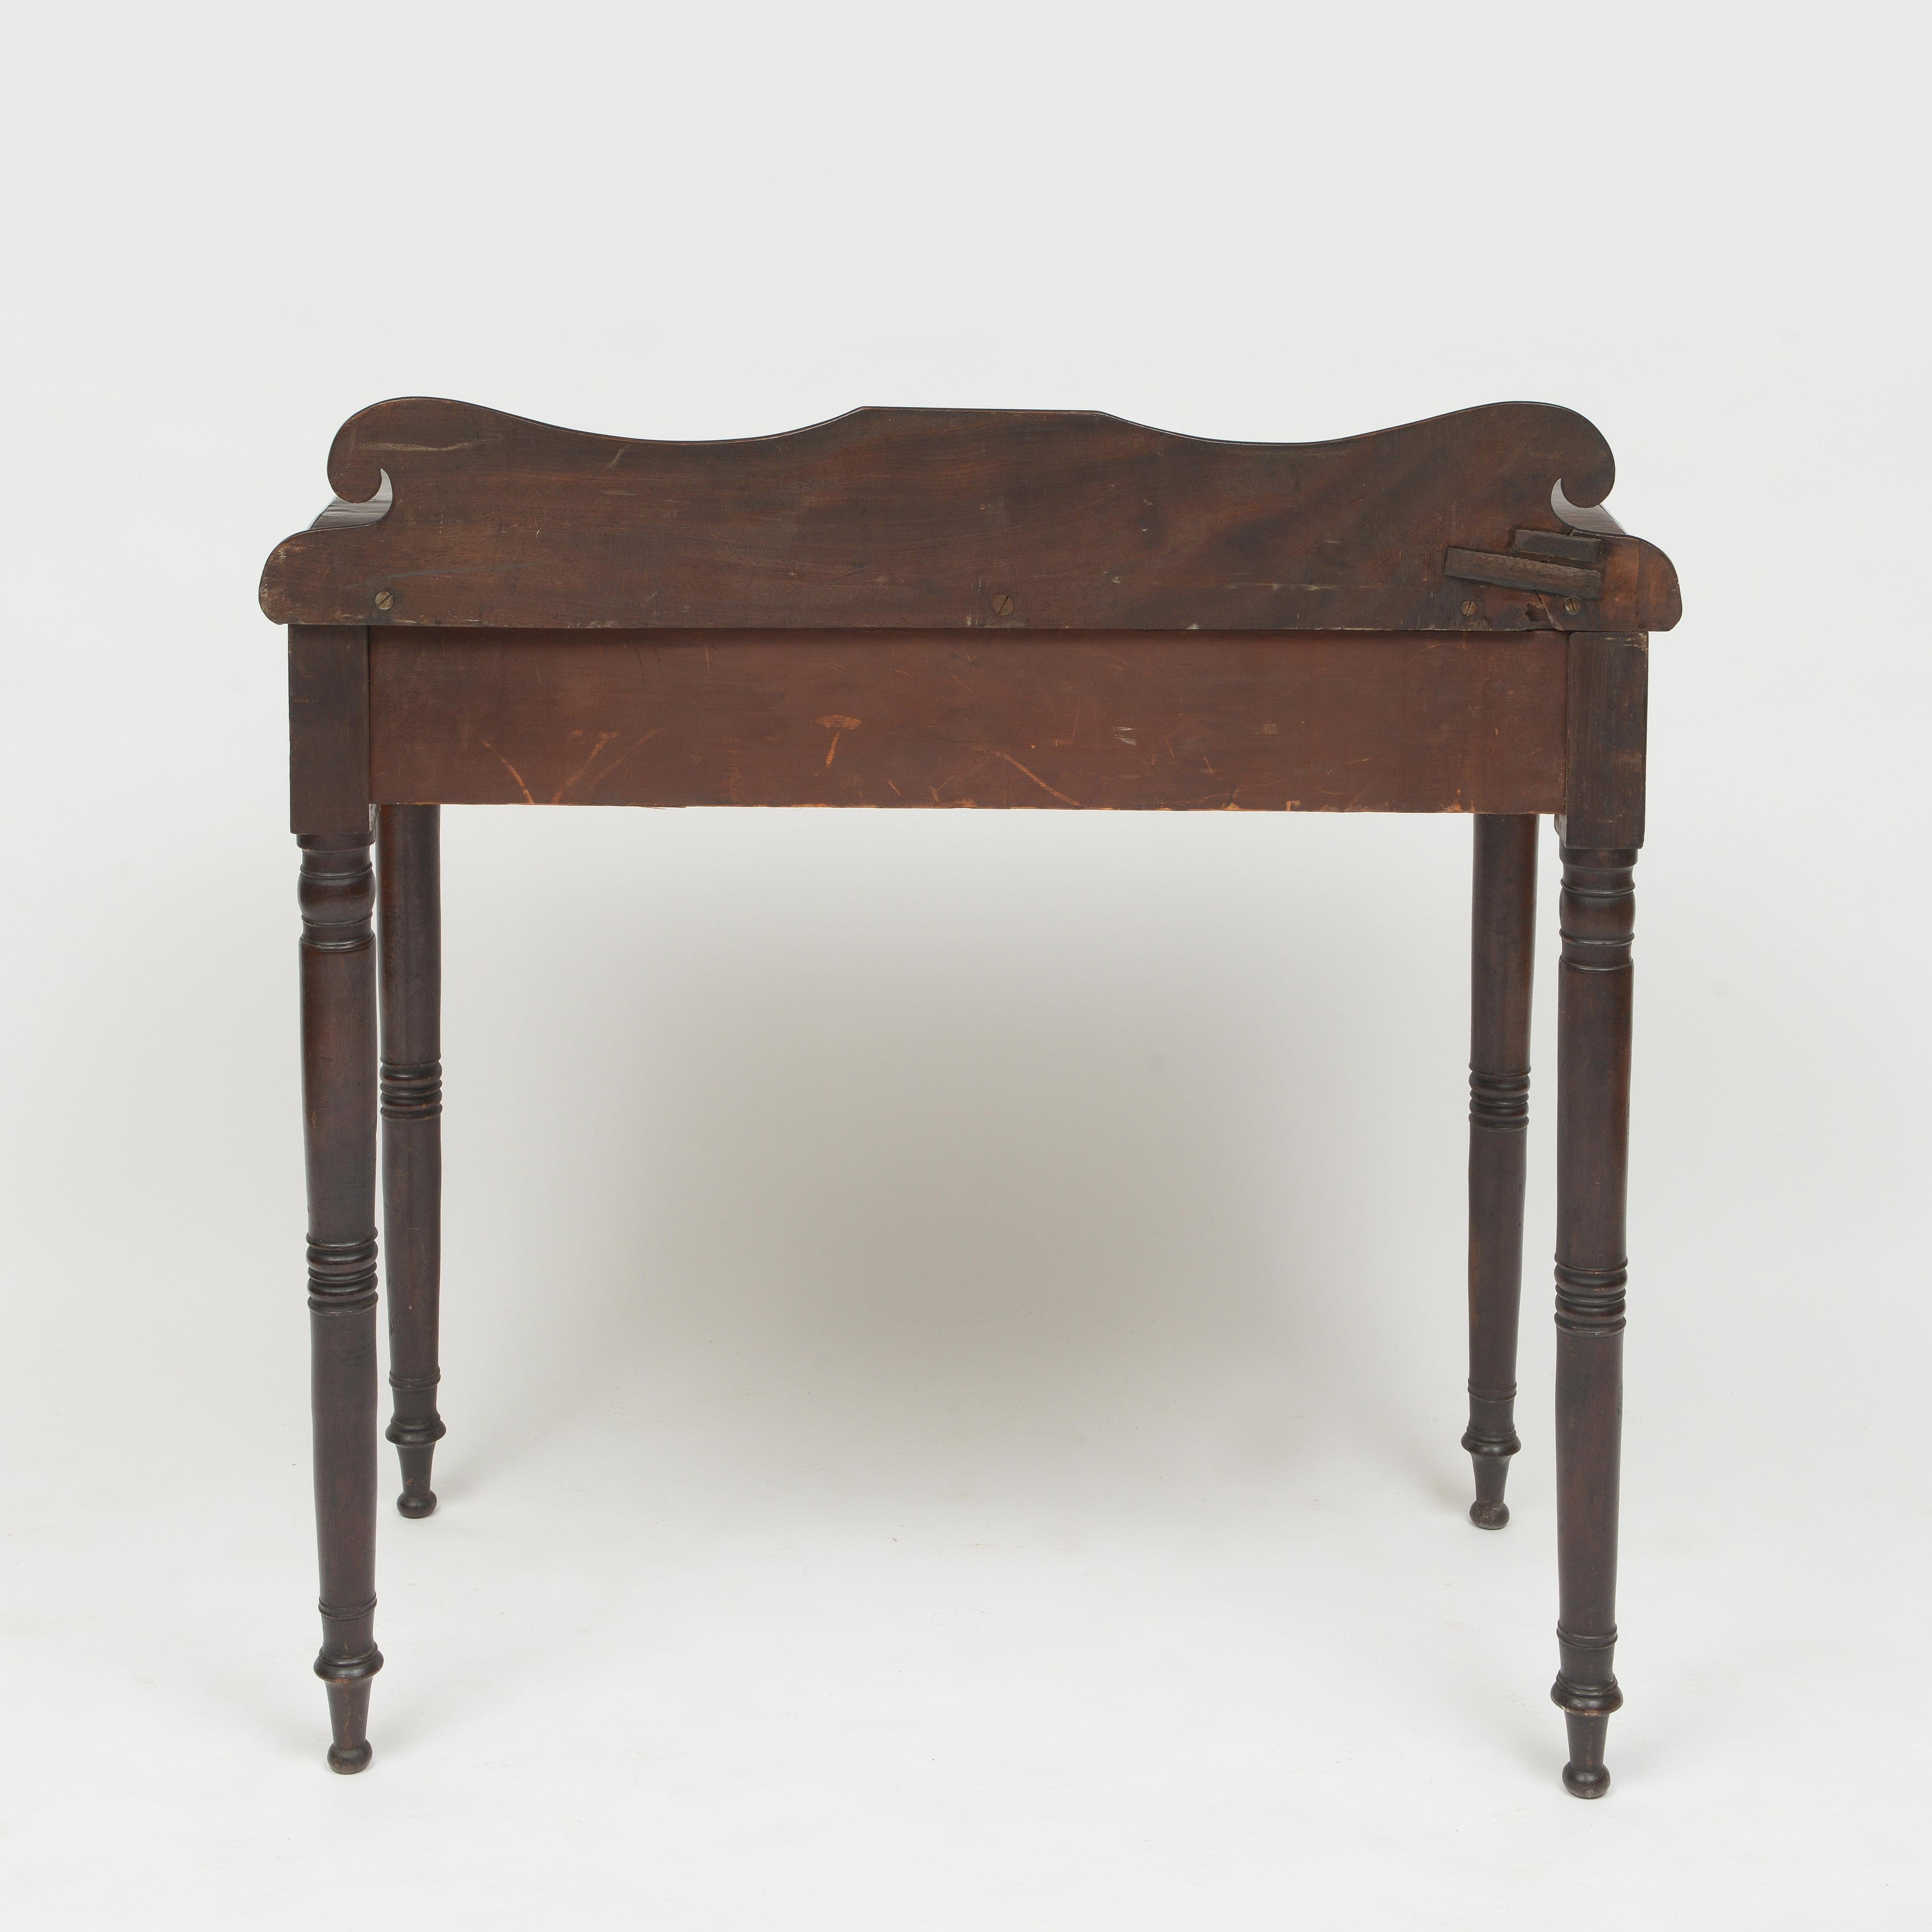 Mid 19th Century American Walnut Console Table With Single Drawer For Sale 1